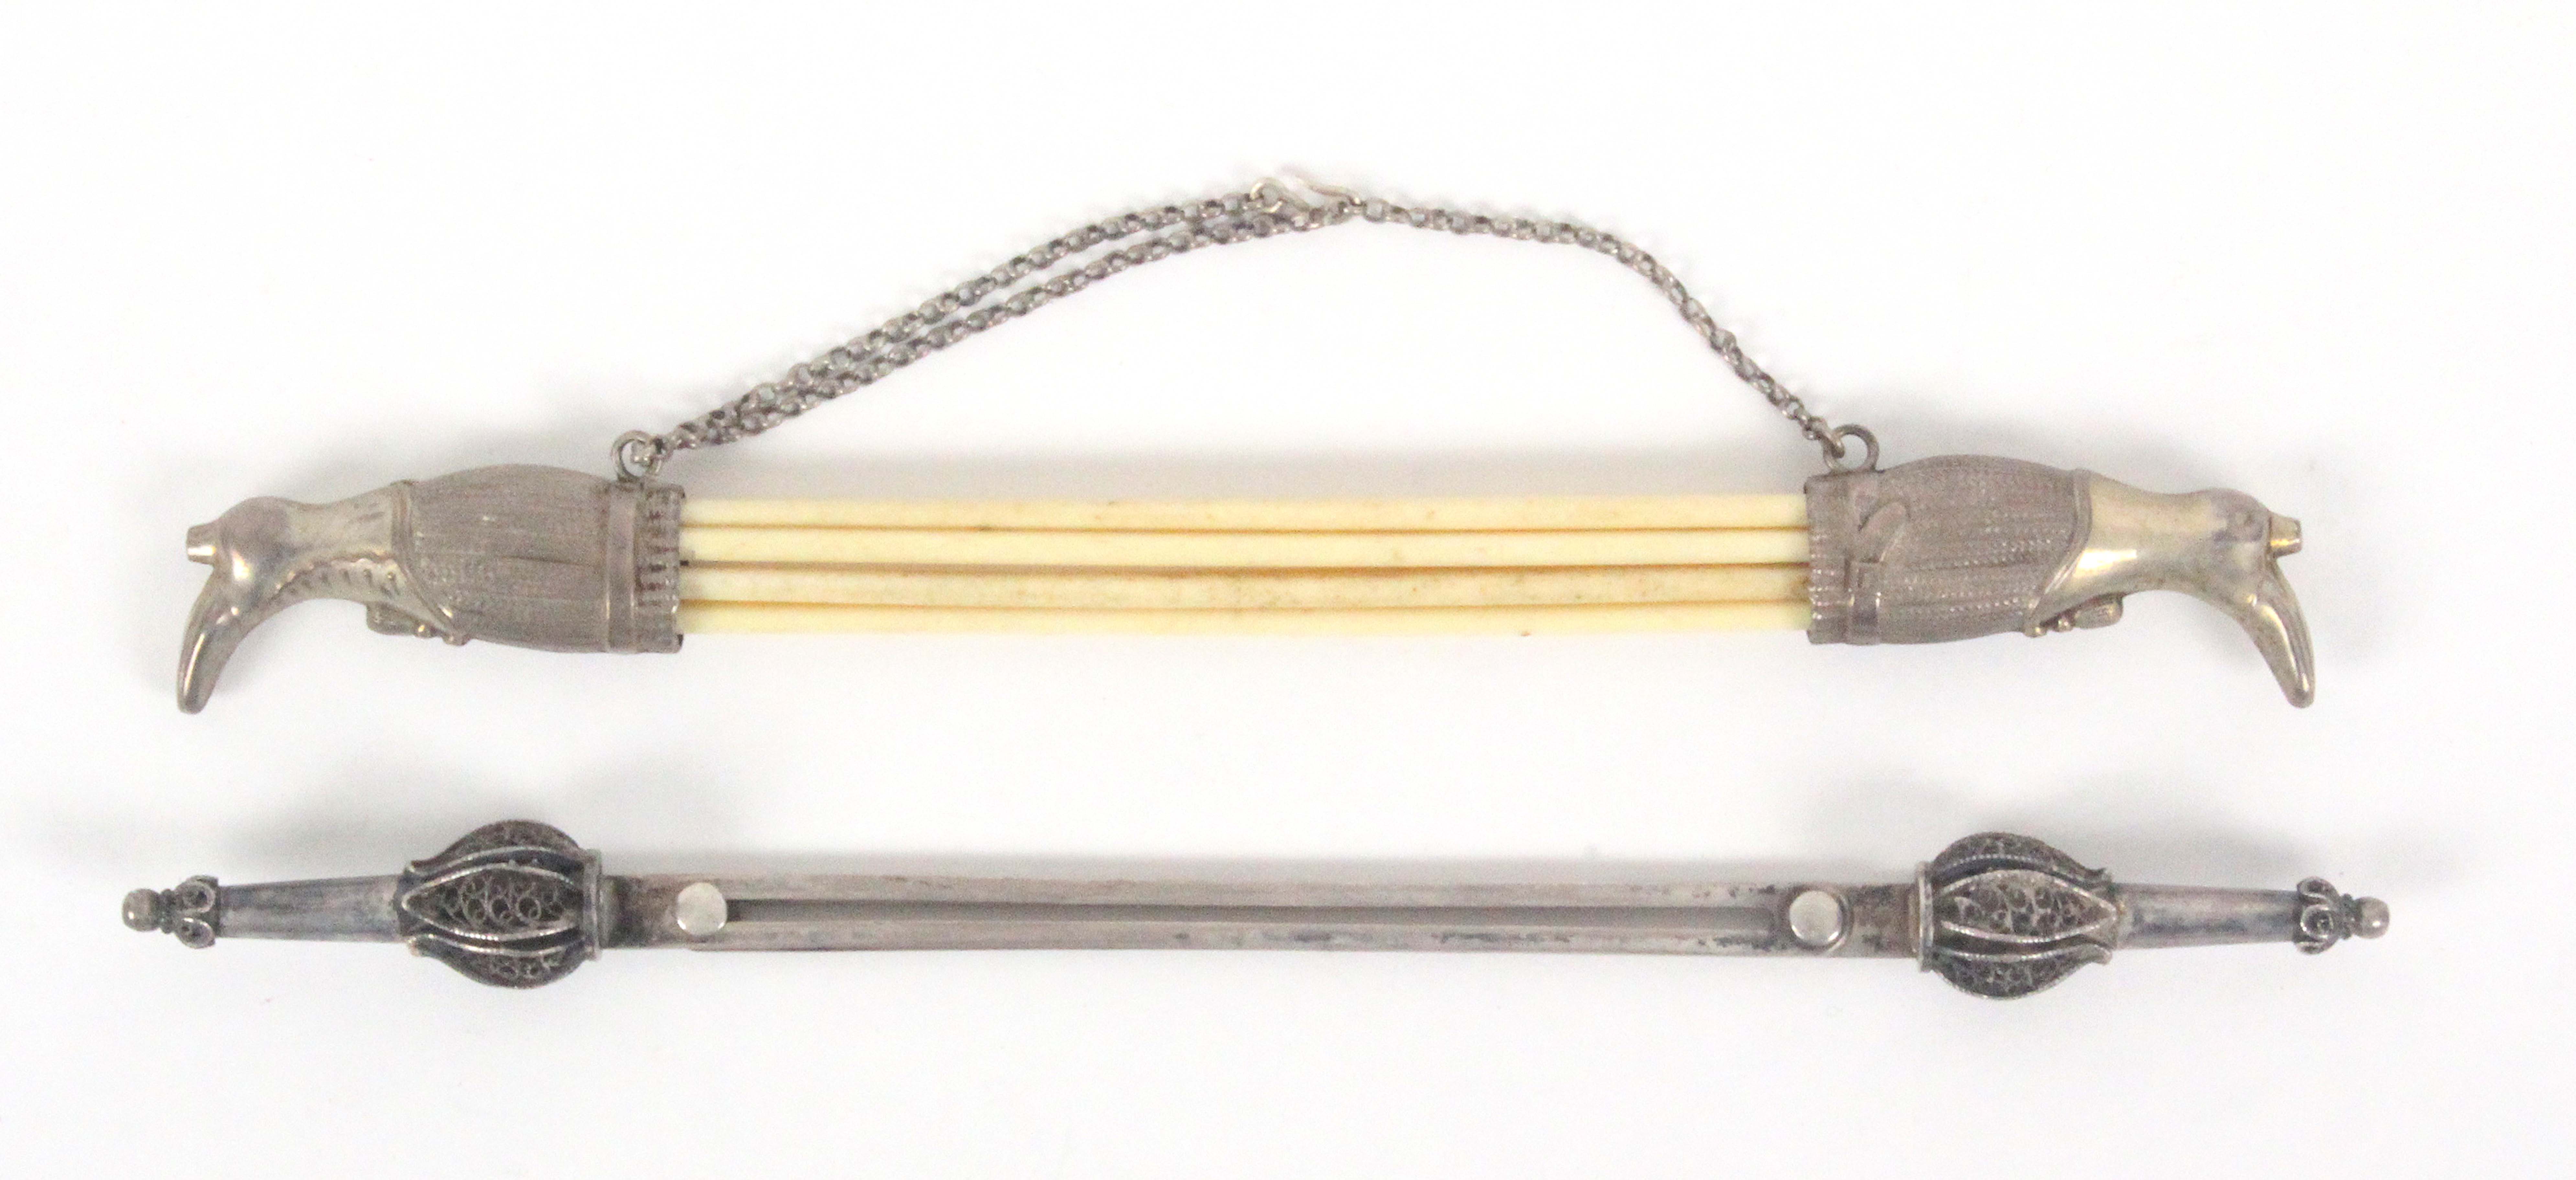 Two German silver knitting needle retainers, comprising a chained pair in the form of lady's boots